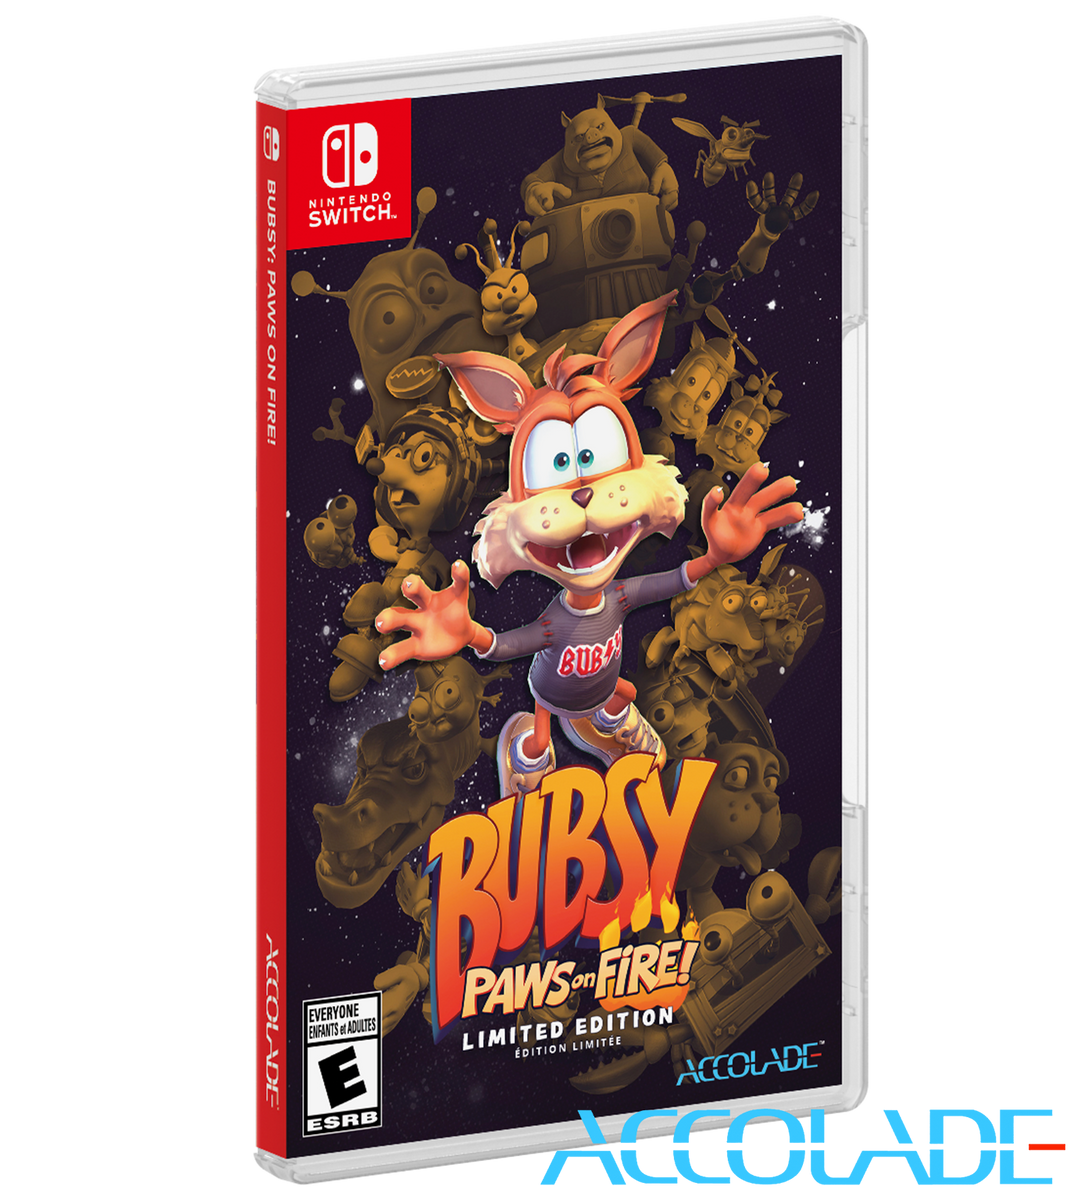 Bubsy Paws on Fire Free Download